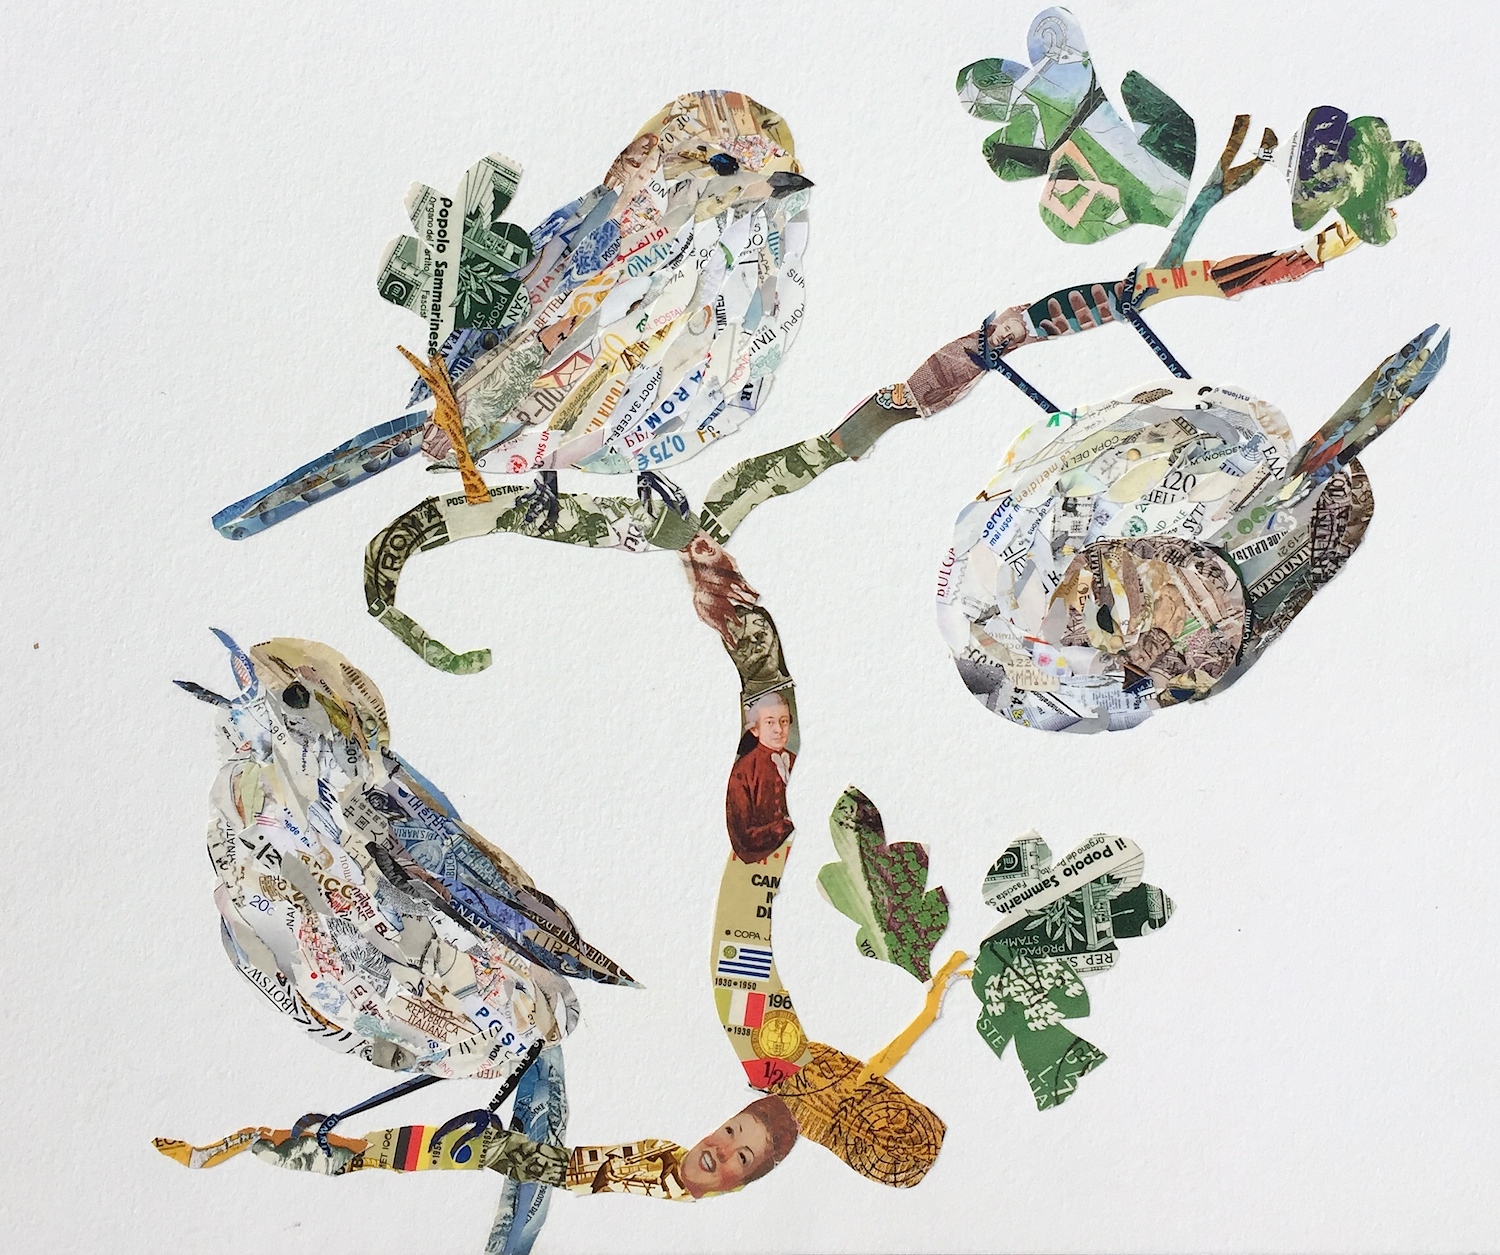 Kerry Buchman, Bushtits, 2015. Postage stamps on paper, 9 x 12 in.